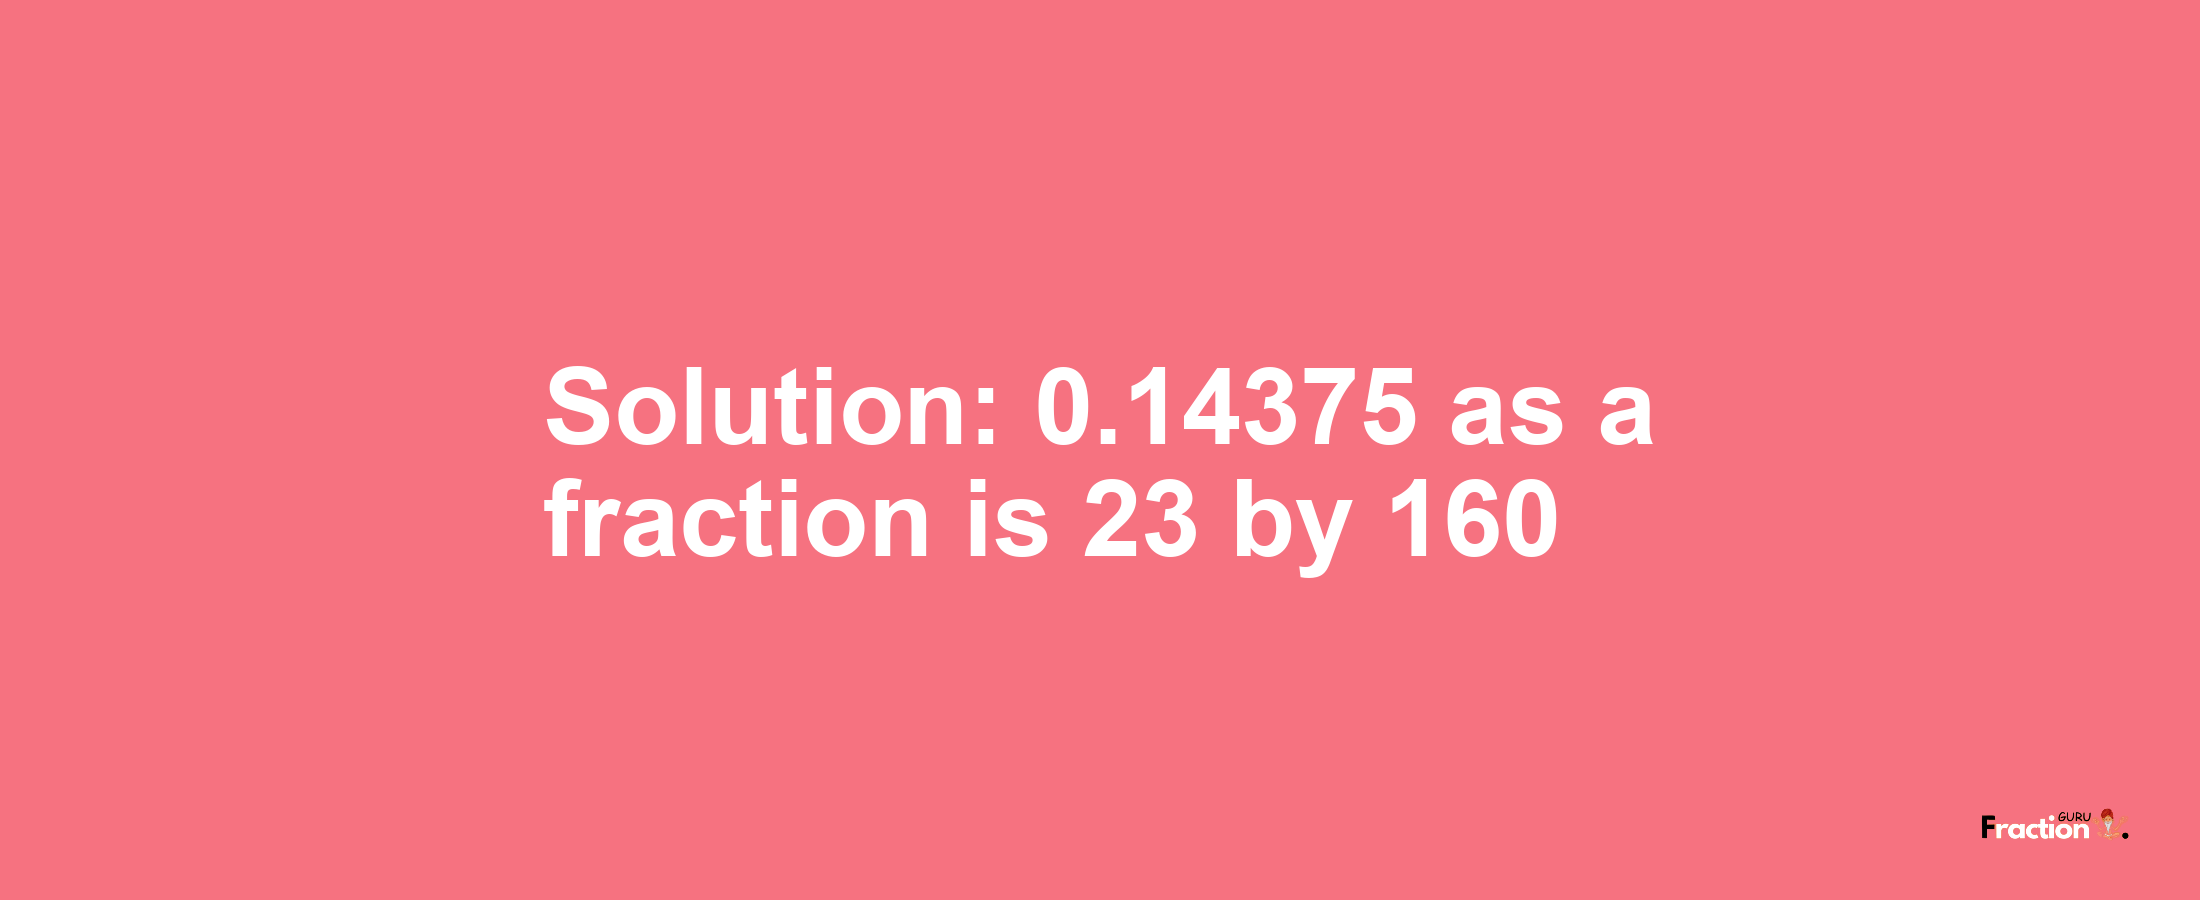 Solution:0.14375 as a fraction is 23/160